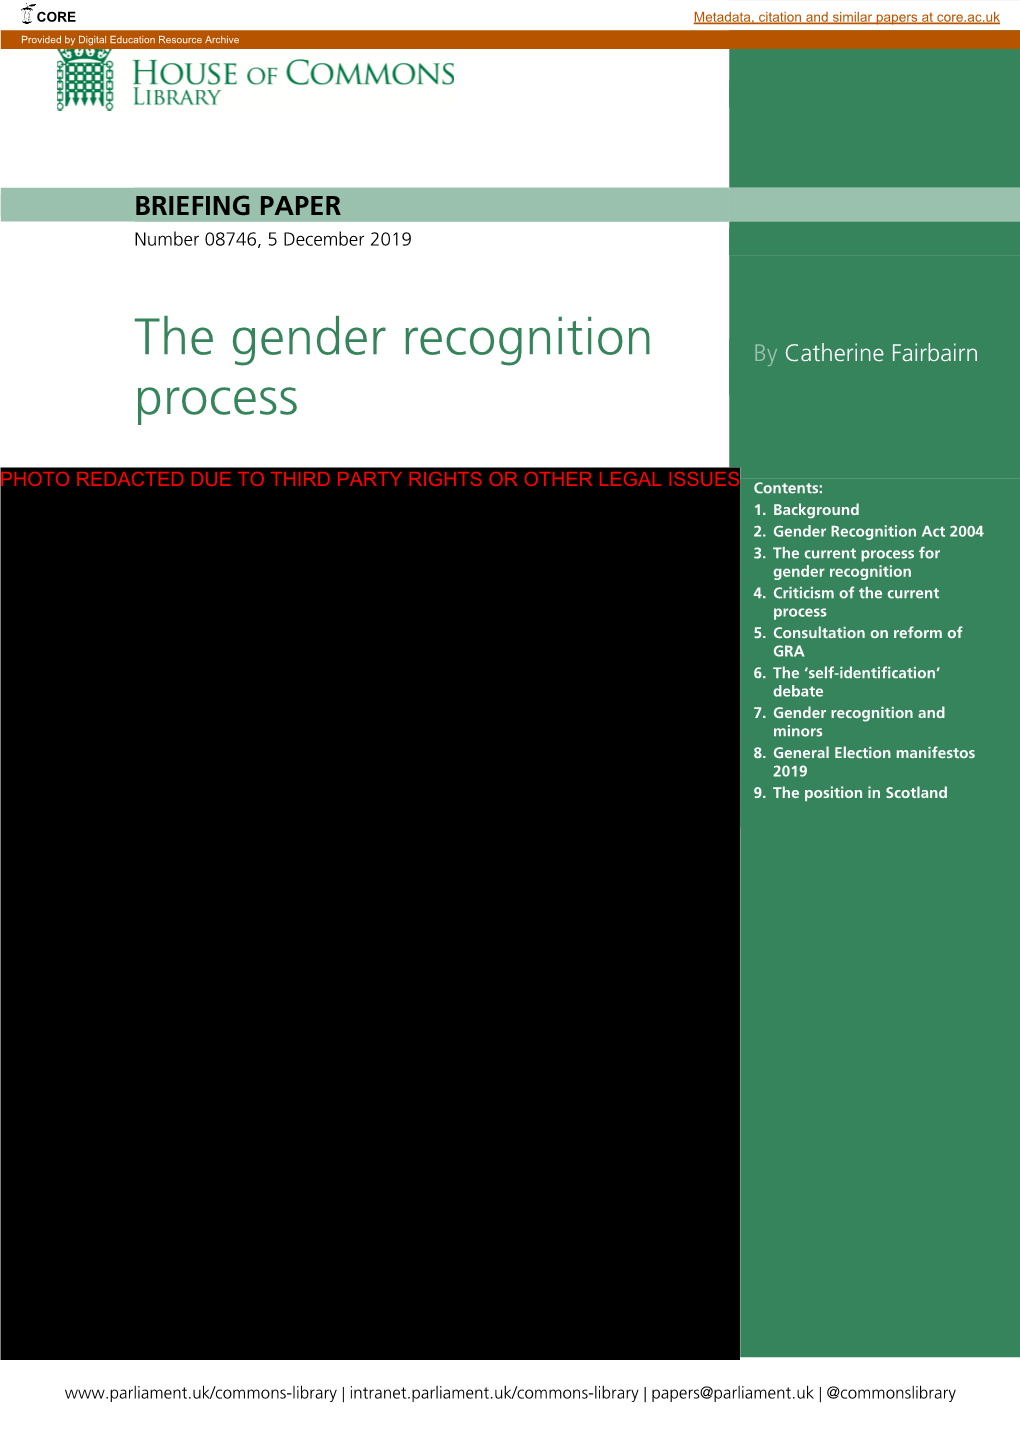 The Gender Recognition Process